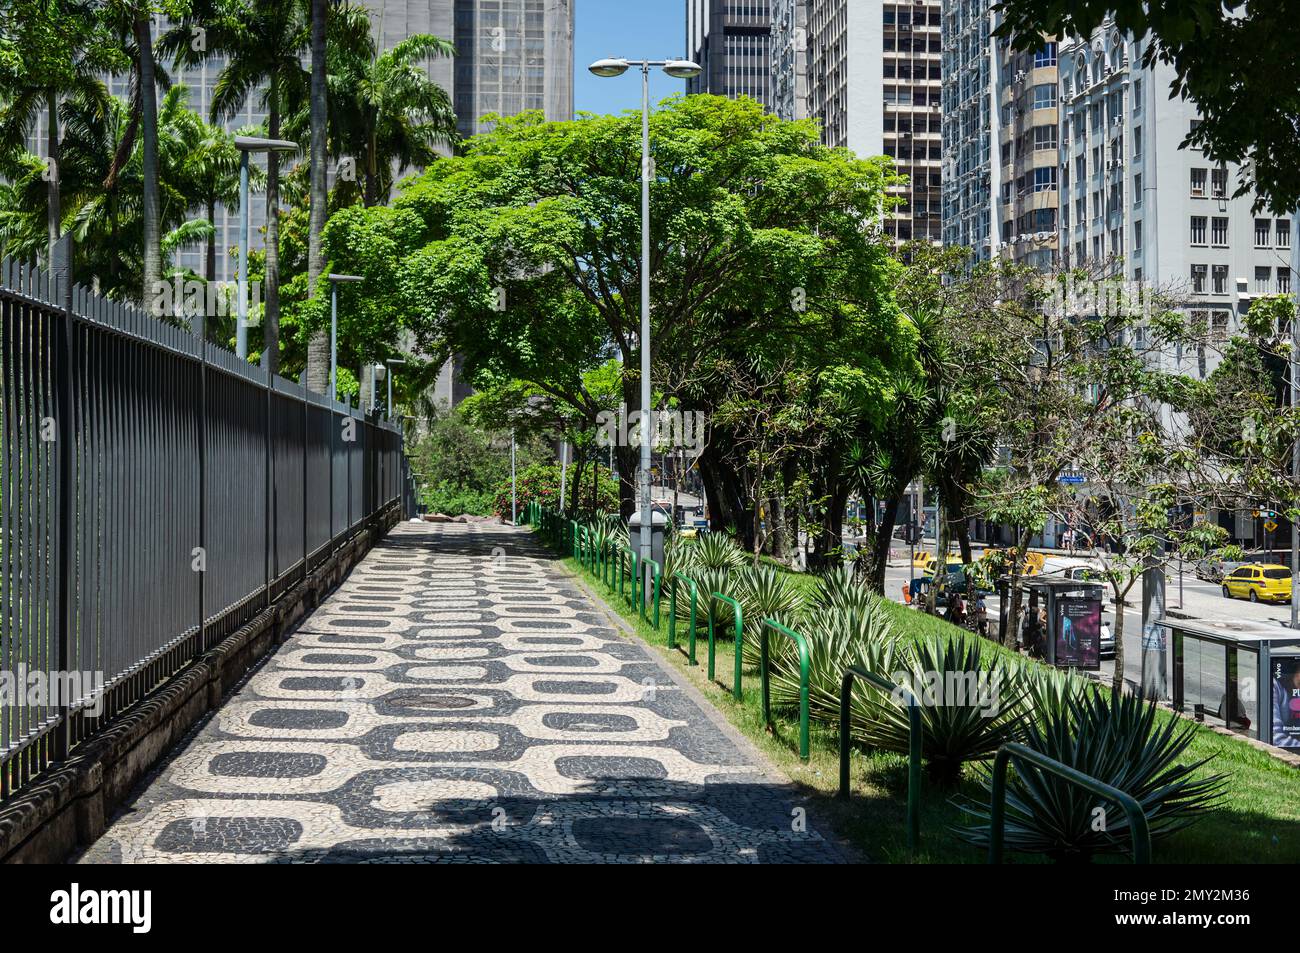 The empty cobblestone pavement sidewalk nearby BNDES headquarters building and Petrobras building in Centro district under summer sunny clear sky. Stock Photo